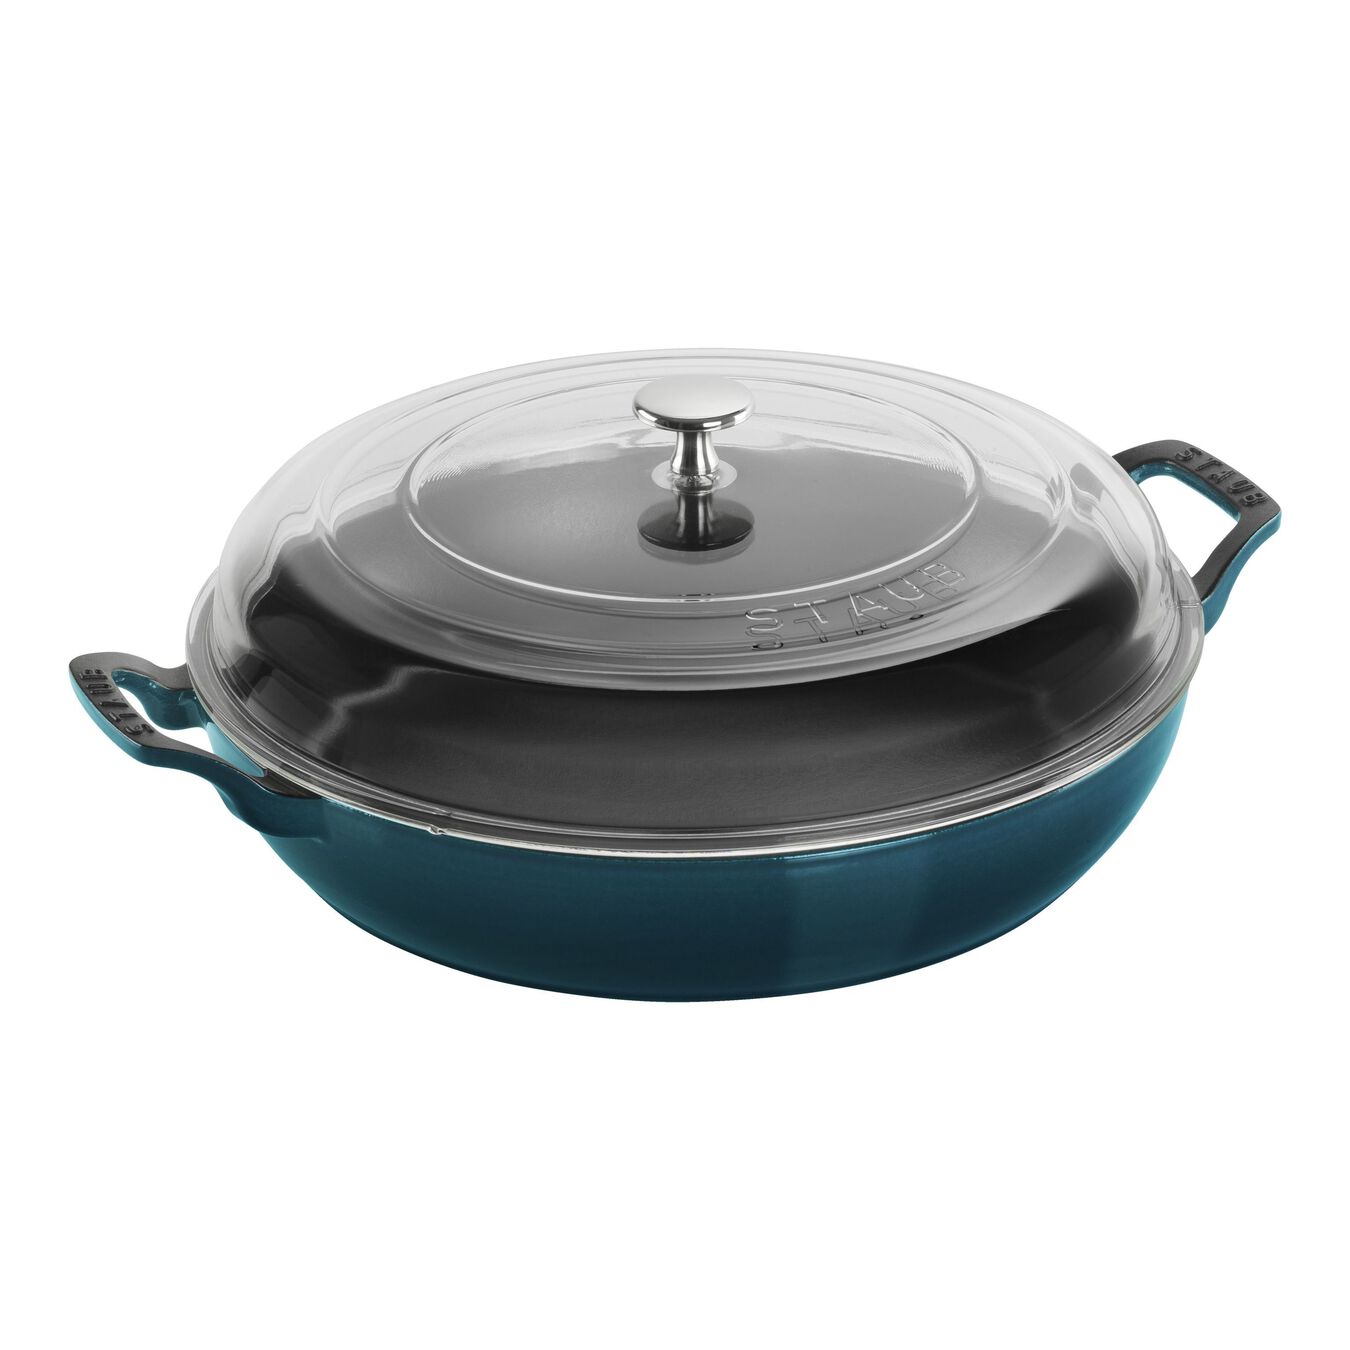 12-inch, Saute pan with glass lid, la mer,,large 1